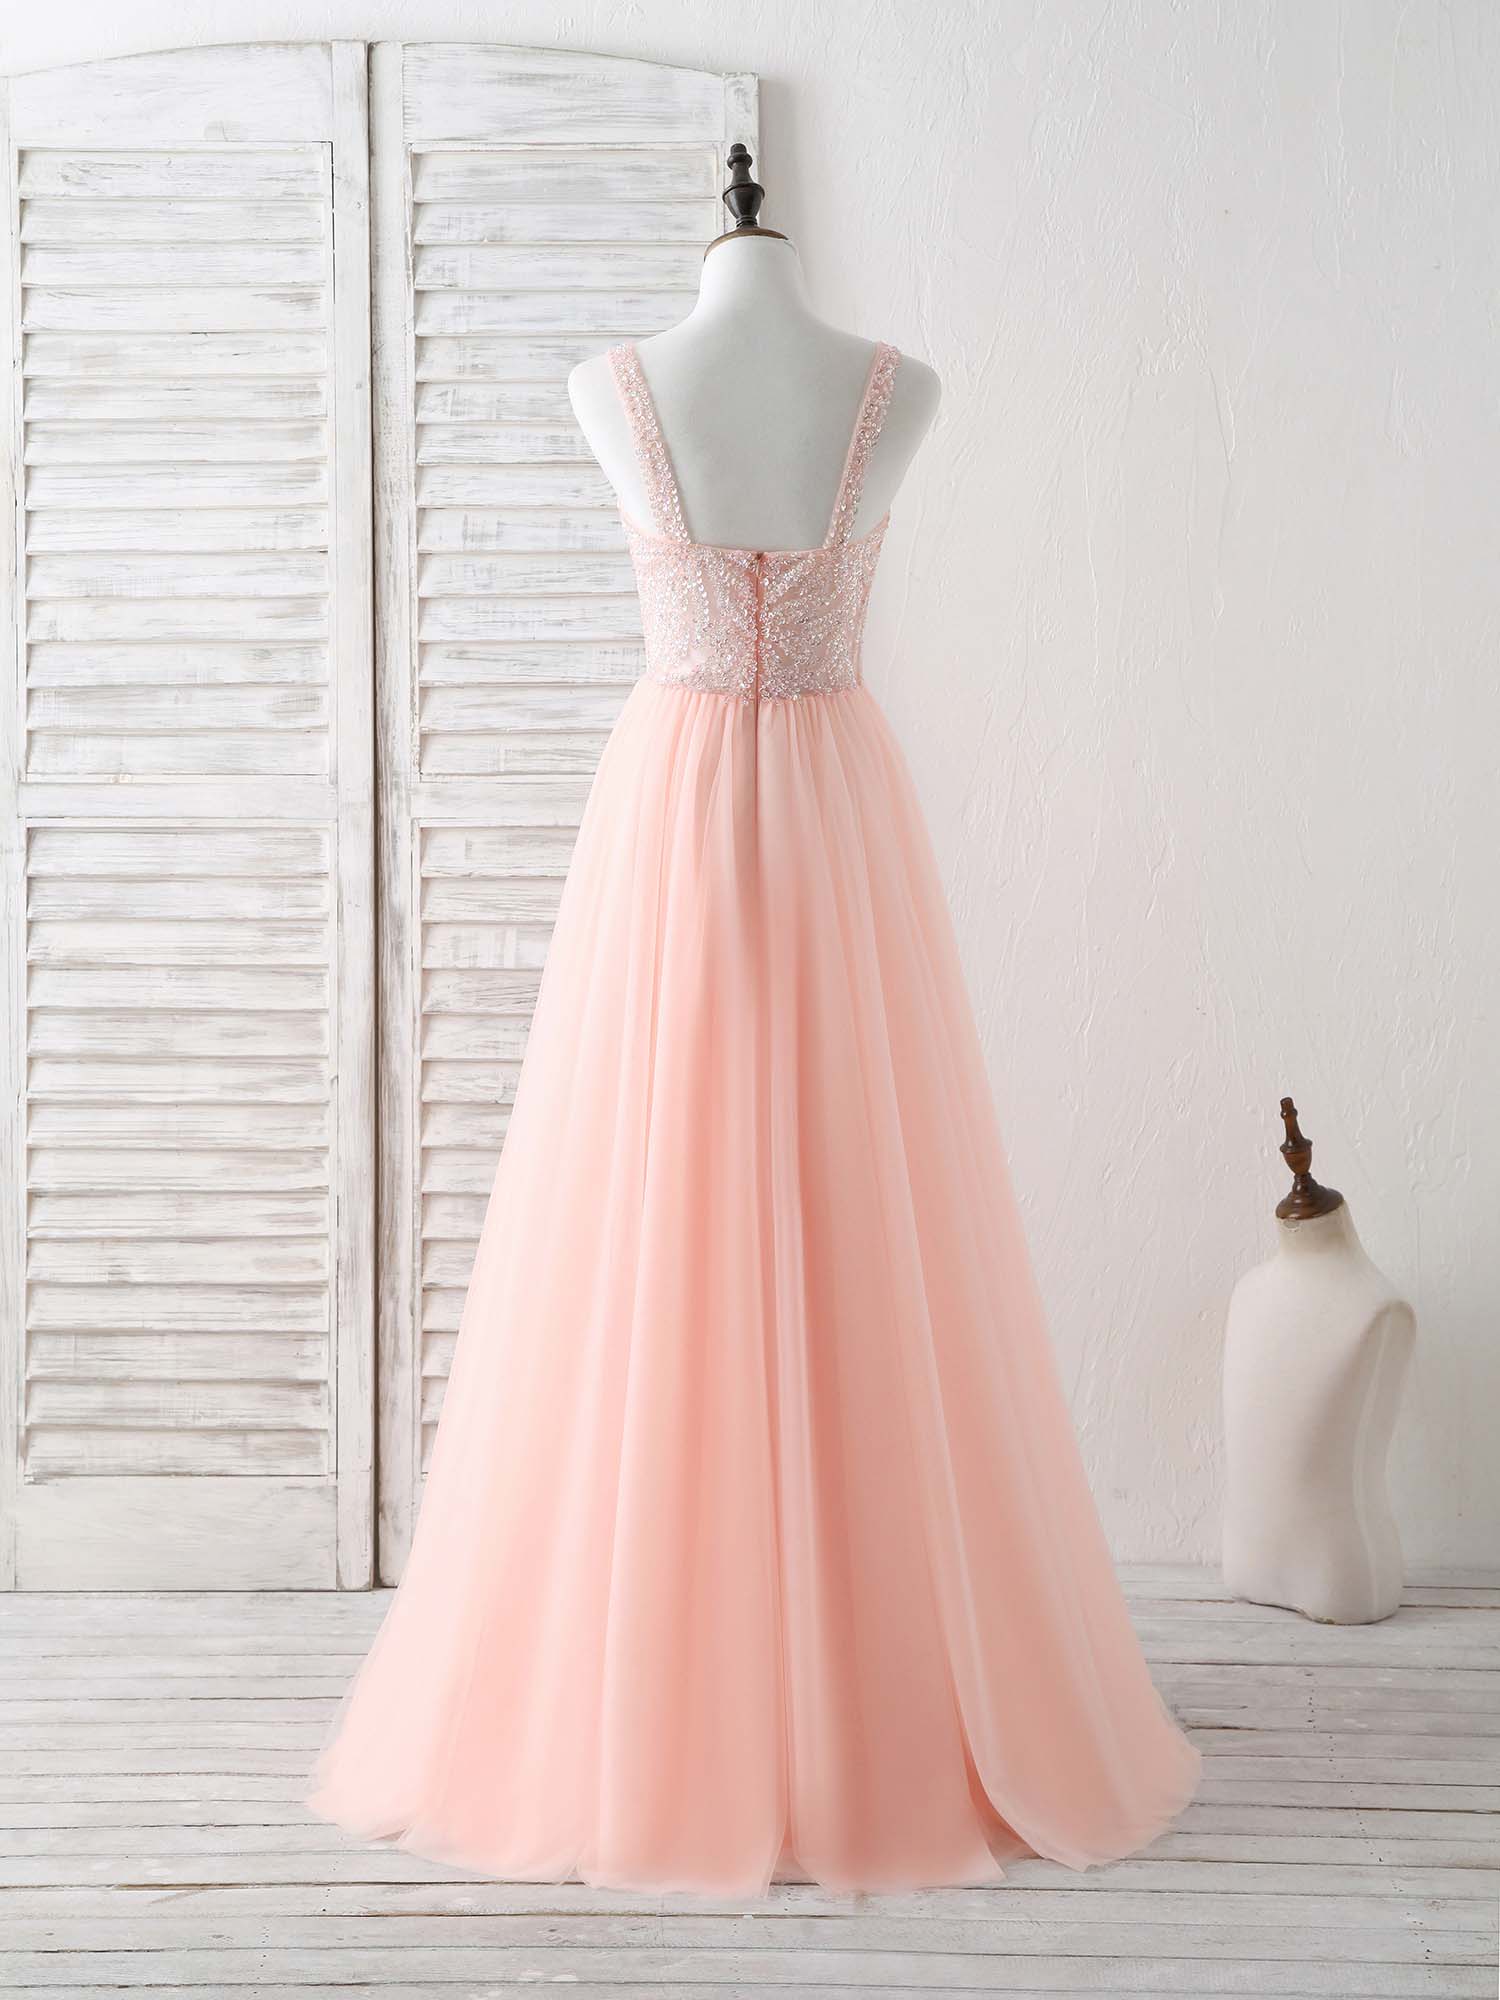 Prom Dress For Kids, Unique Tulle Beads Long Prom Dress, Tulle Evening Dress